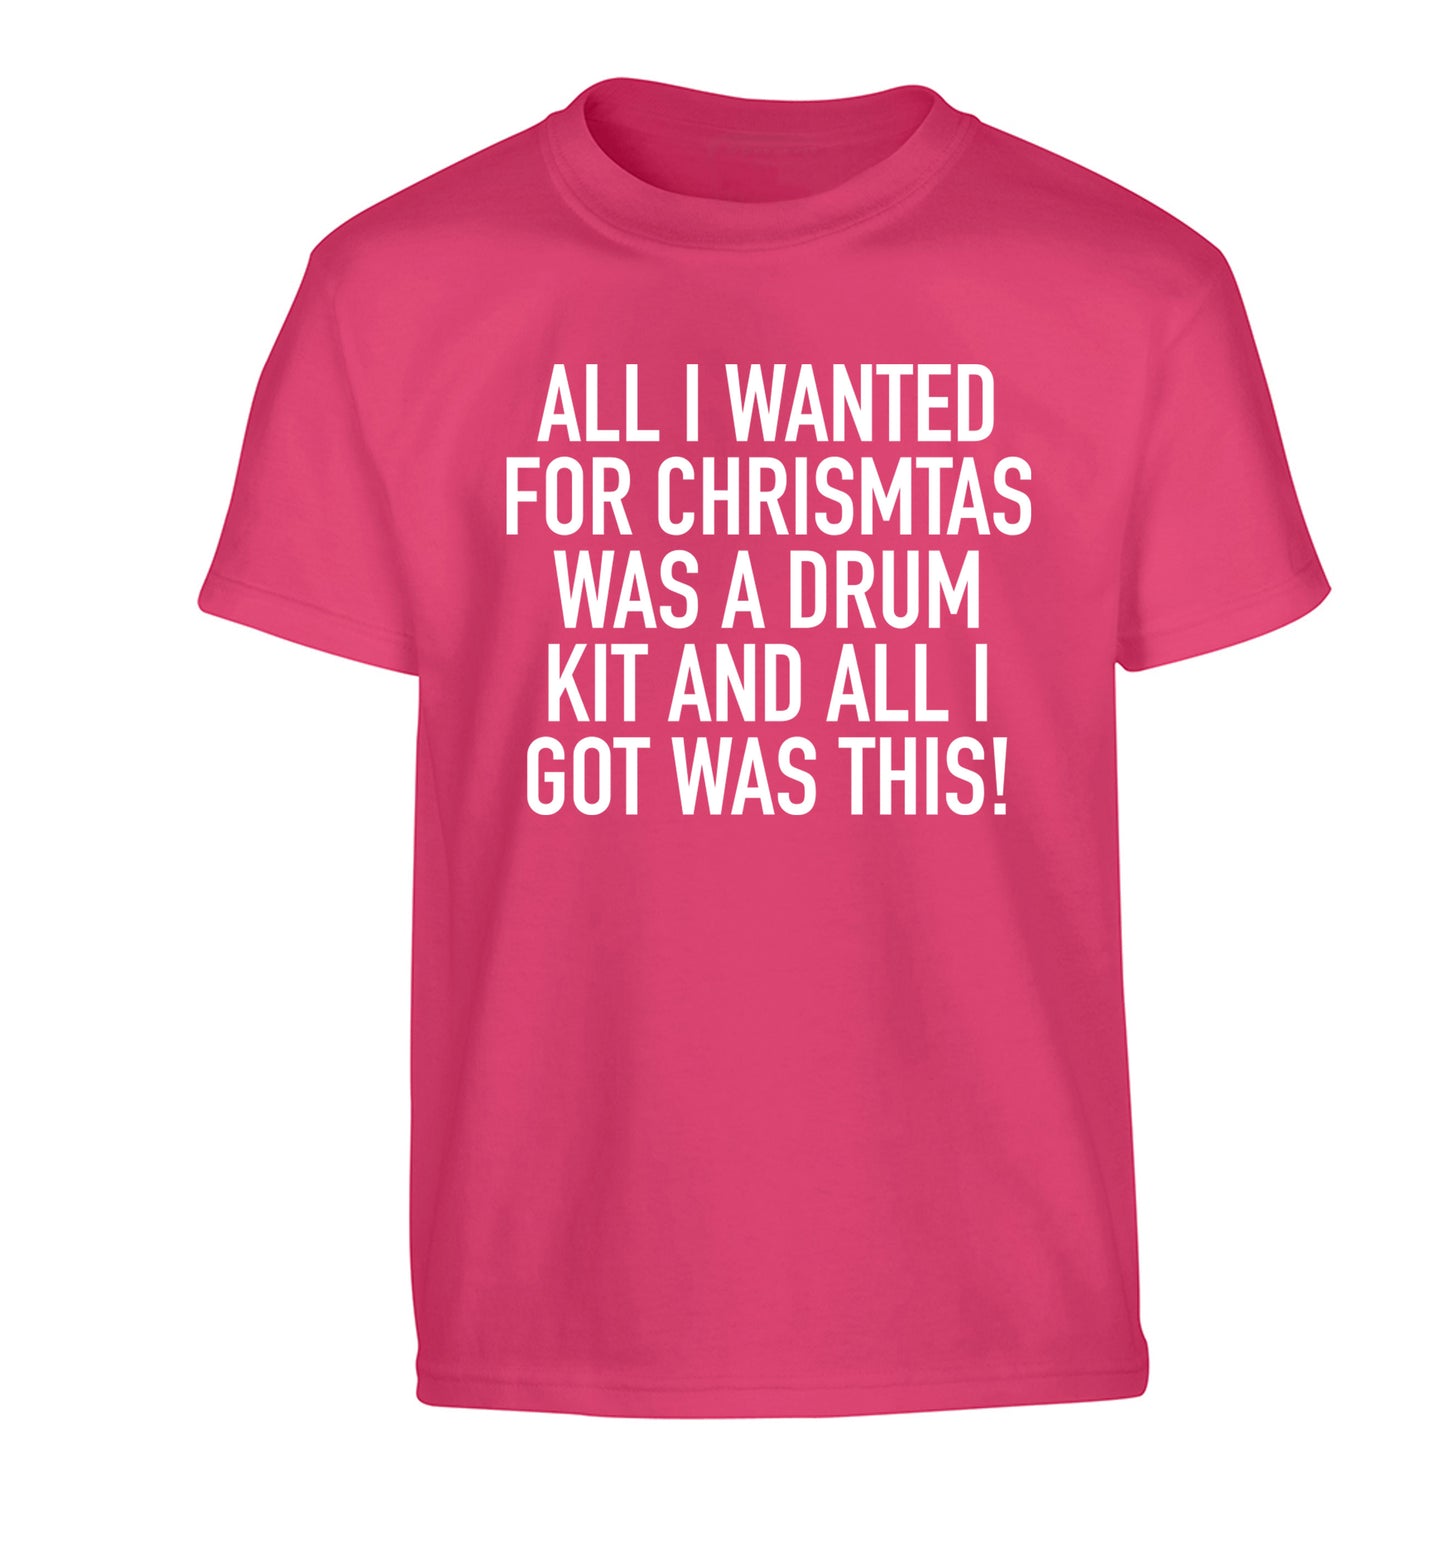 All I wanted for Christmas was a drum kit and all I got was this! Children's pink Tshirt 12-14 Years